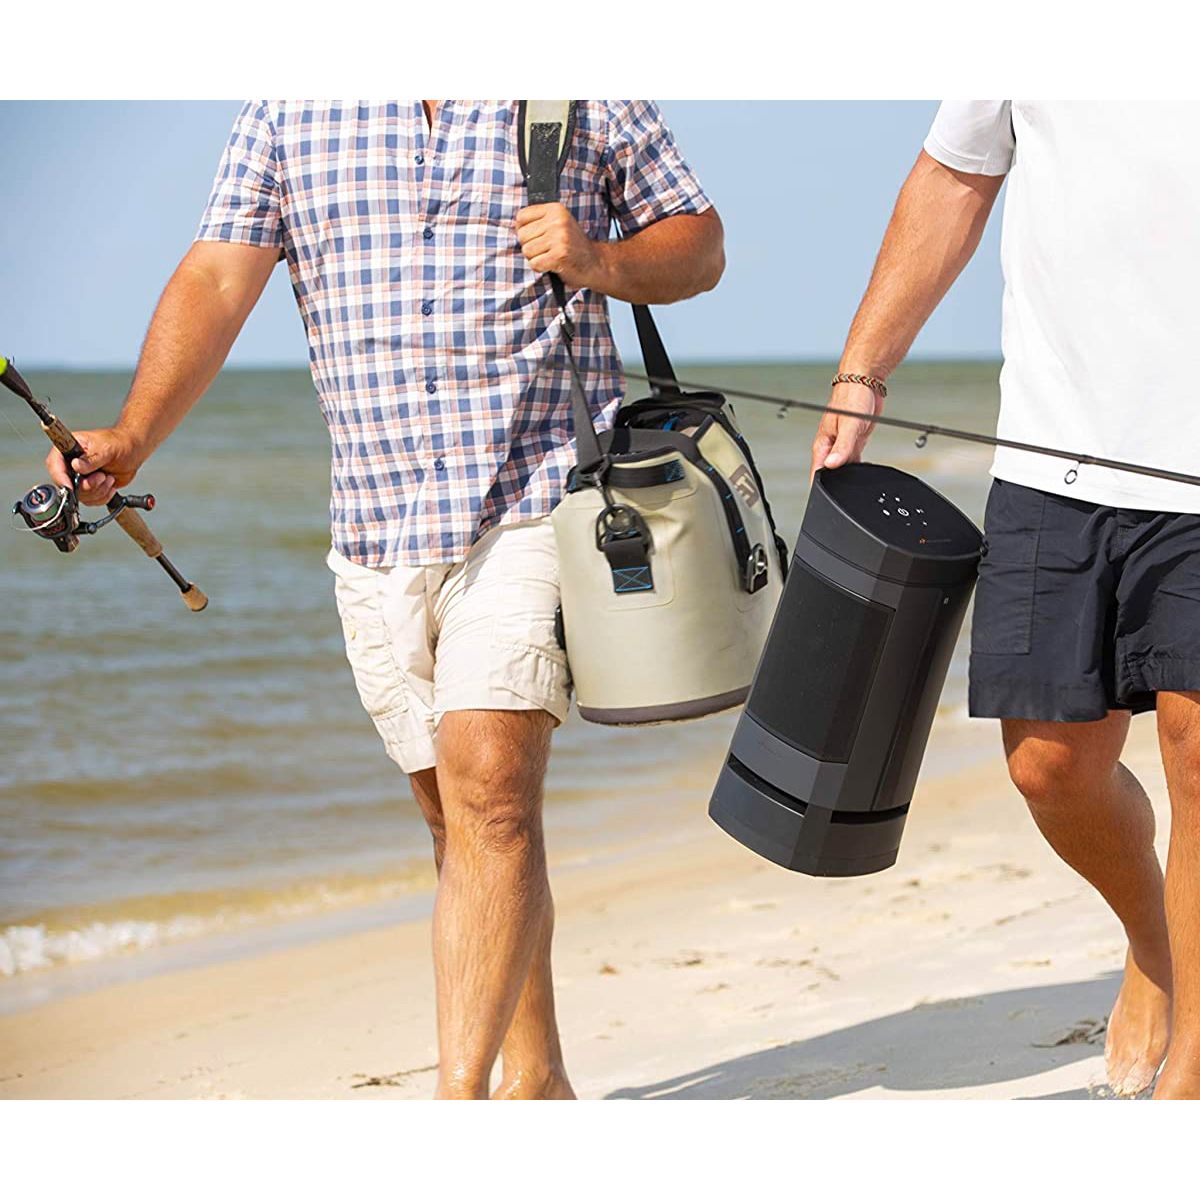 SoundCast VG5 Bluetooth Loudspeaker being carried by fishermen.